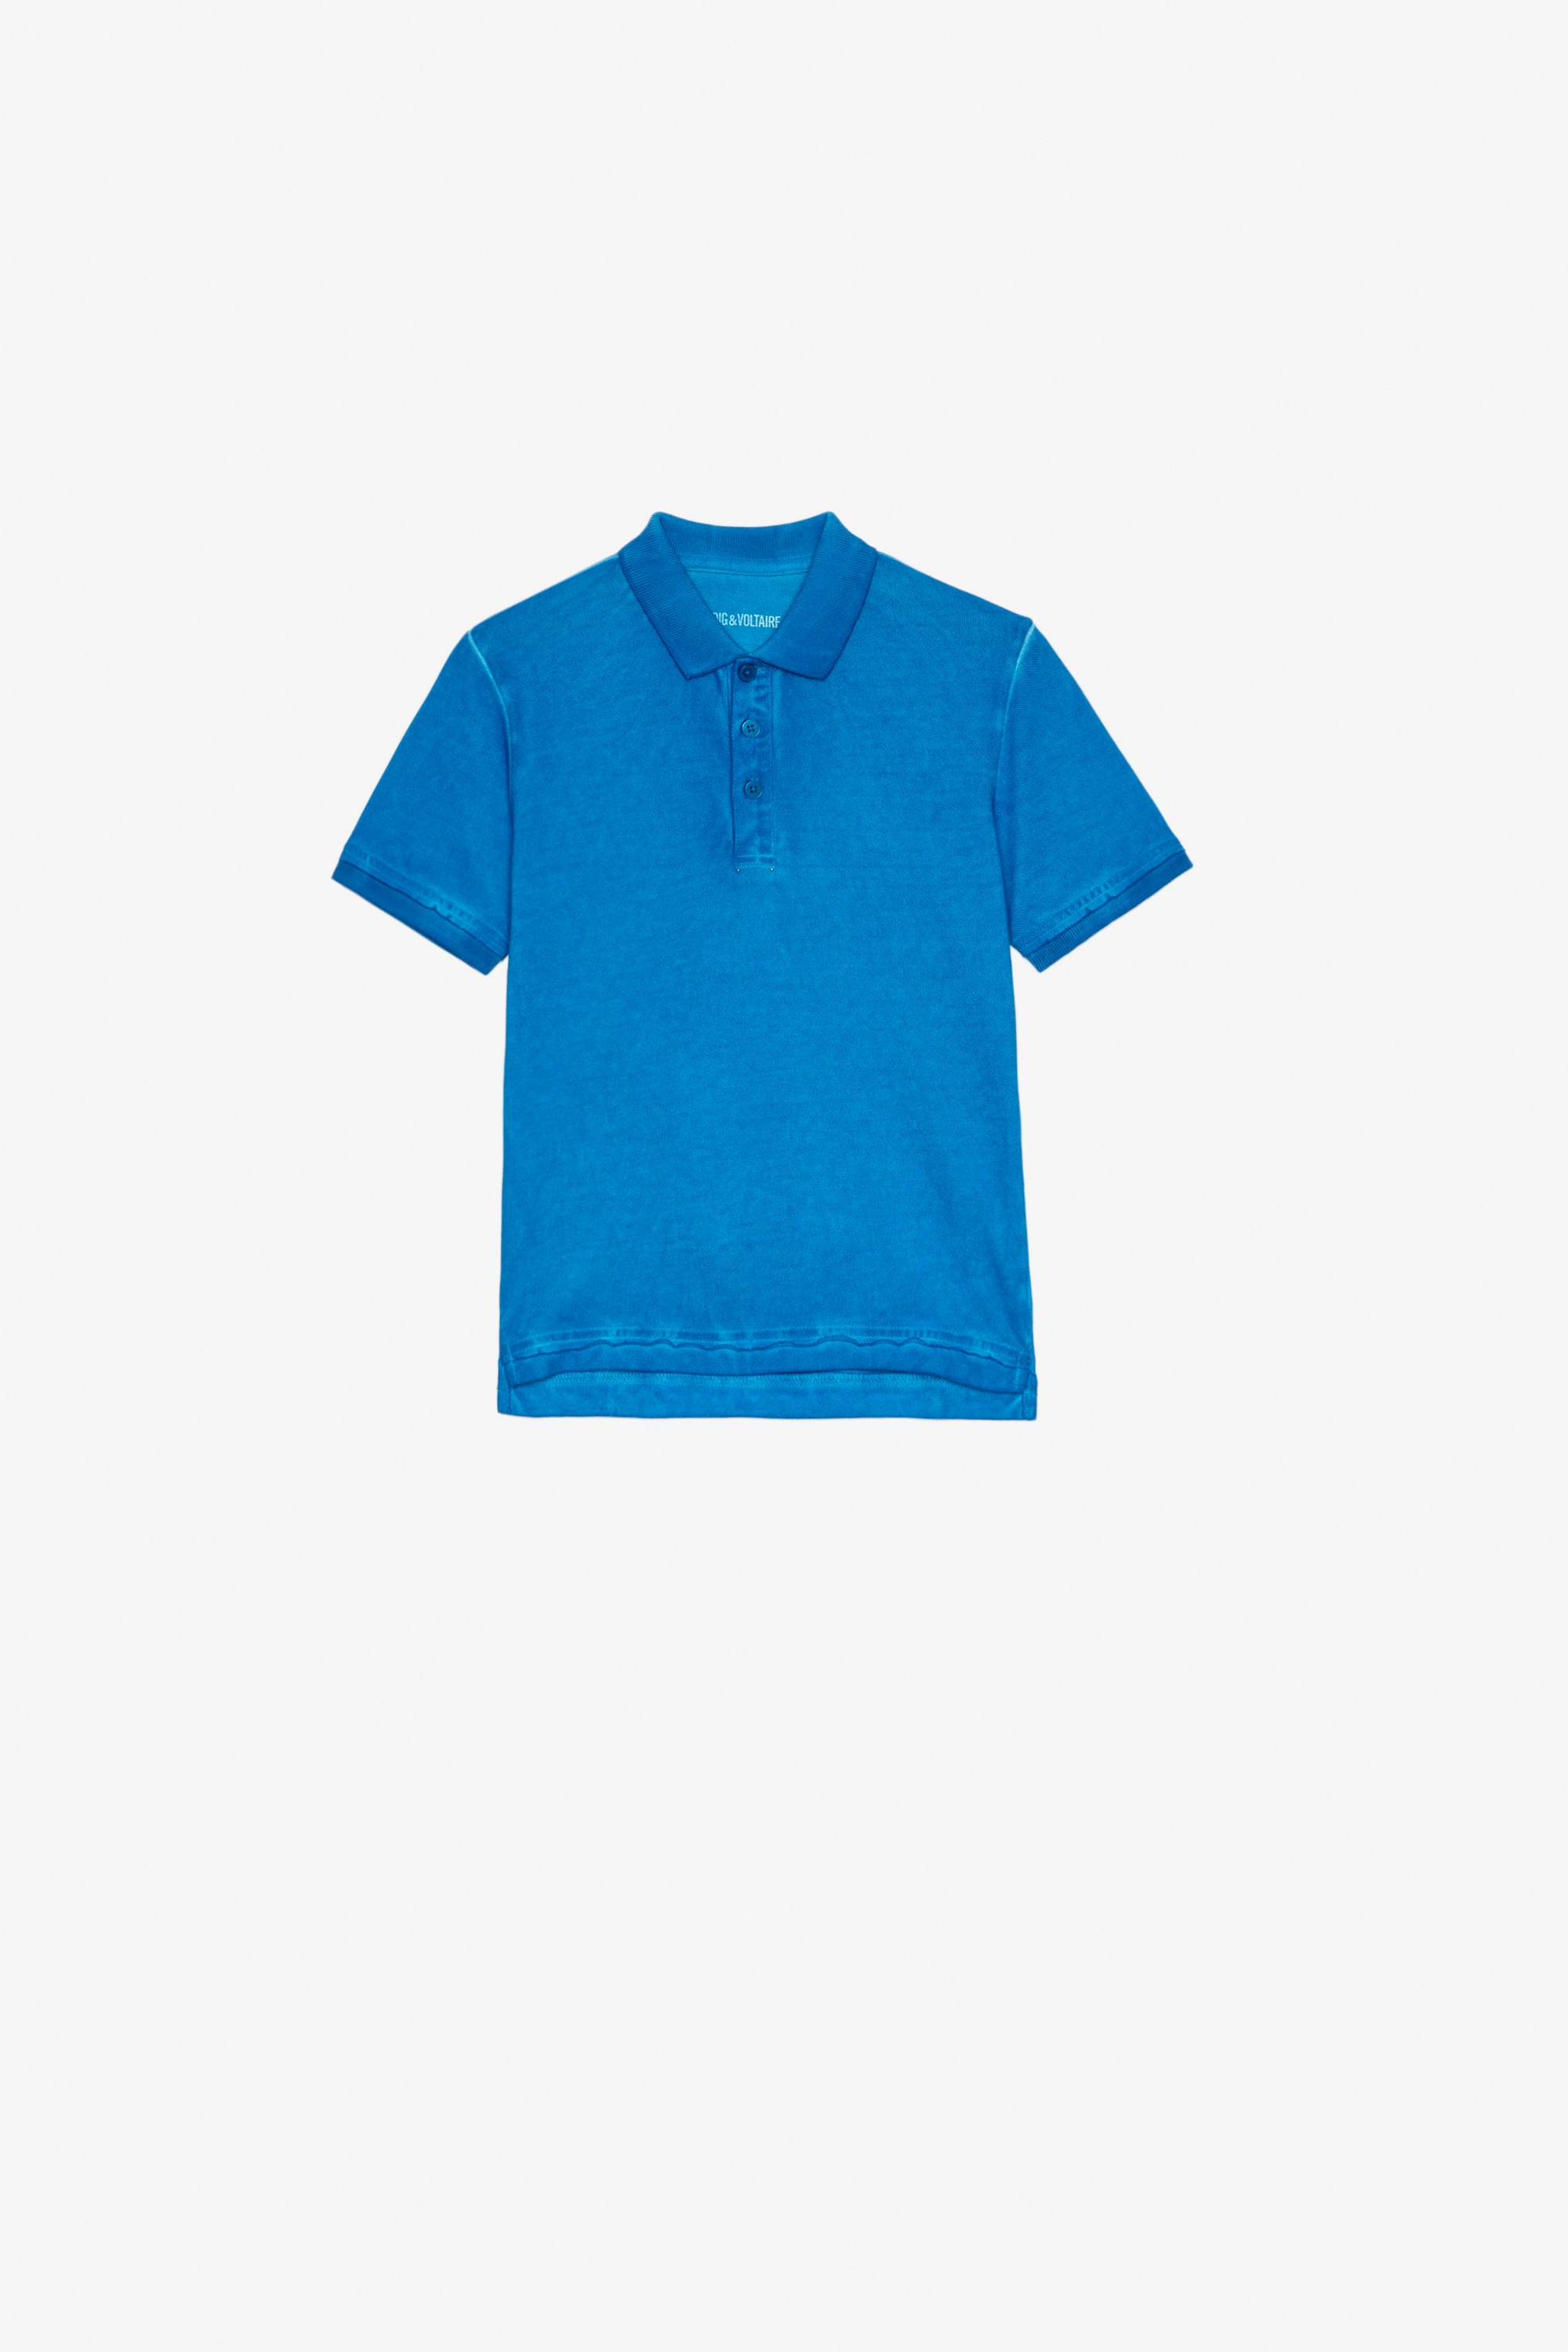 Trot Kids’ Polo Shirt Blue cotton polo shirt with an illustration on the back